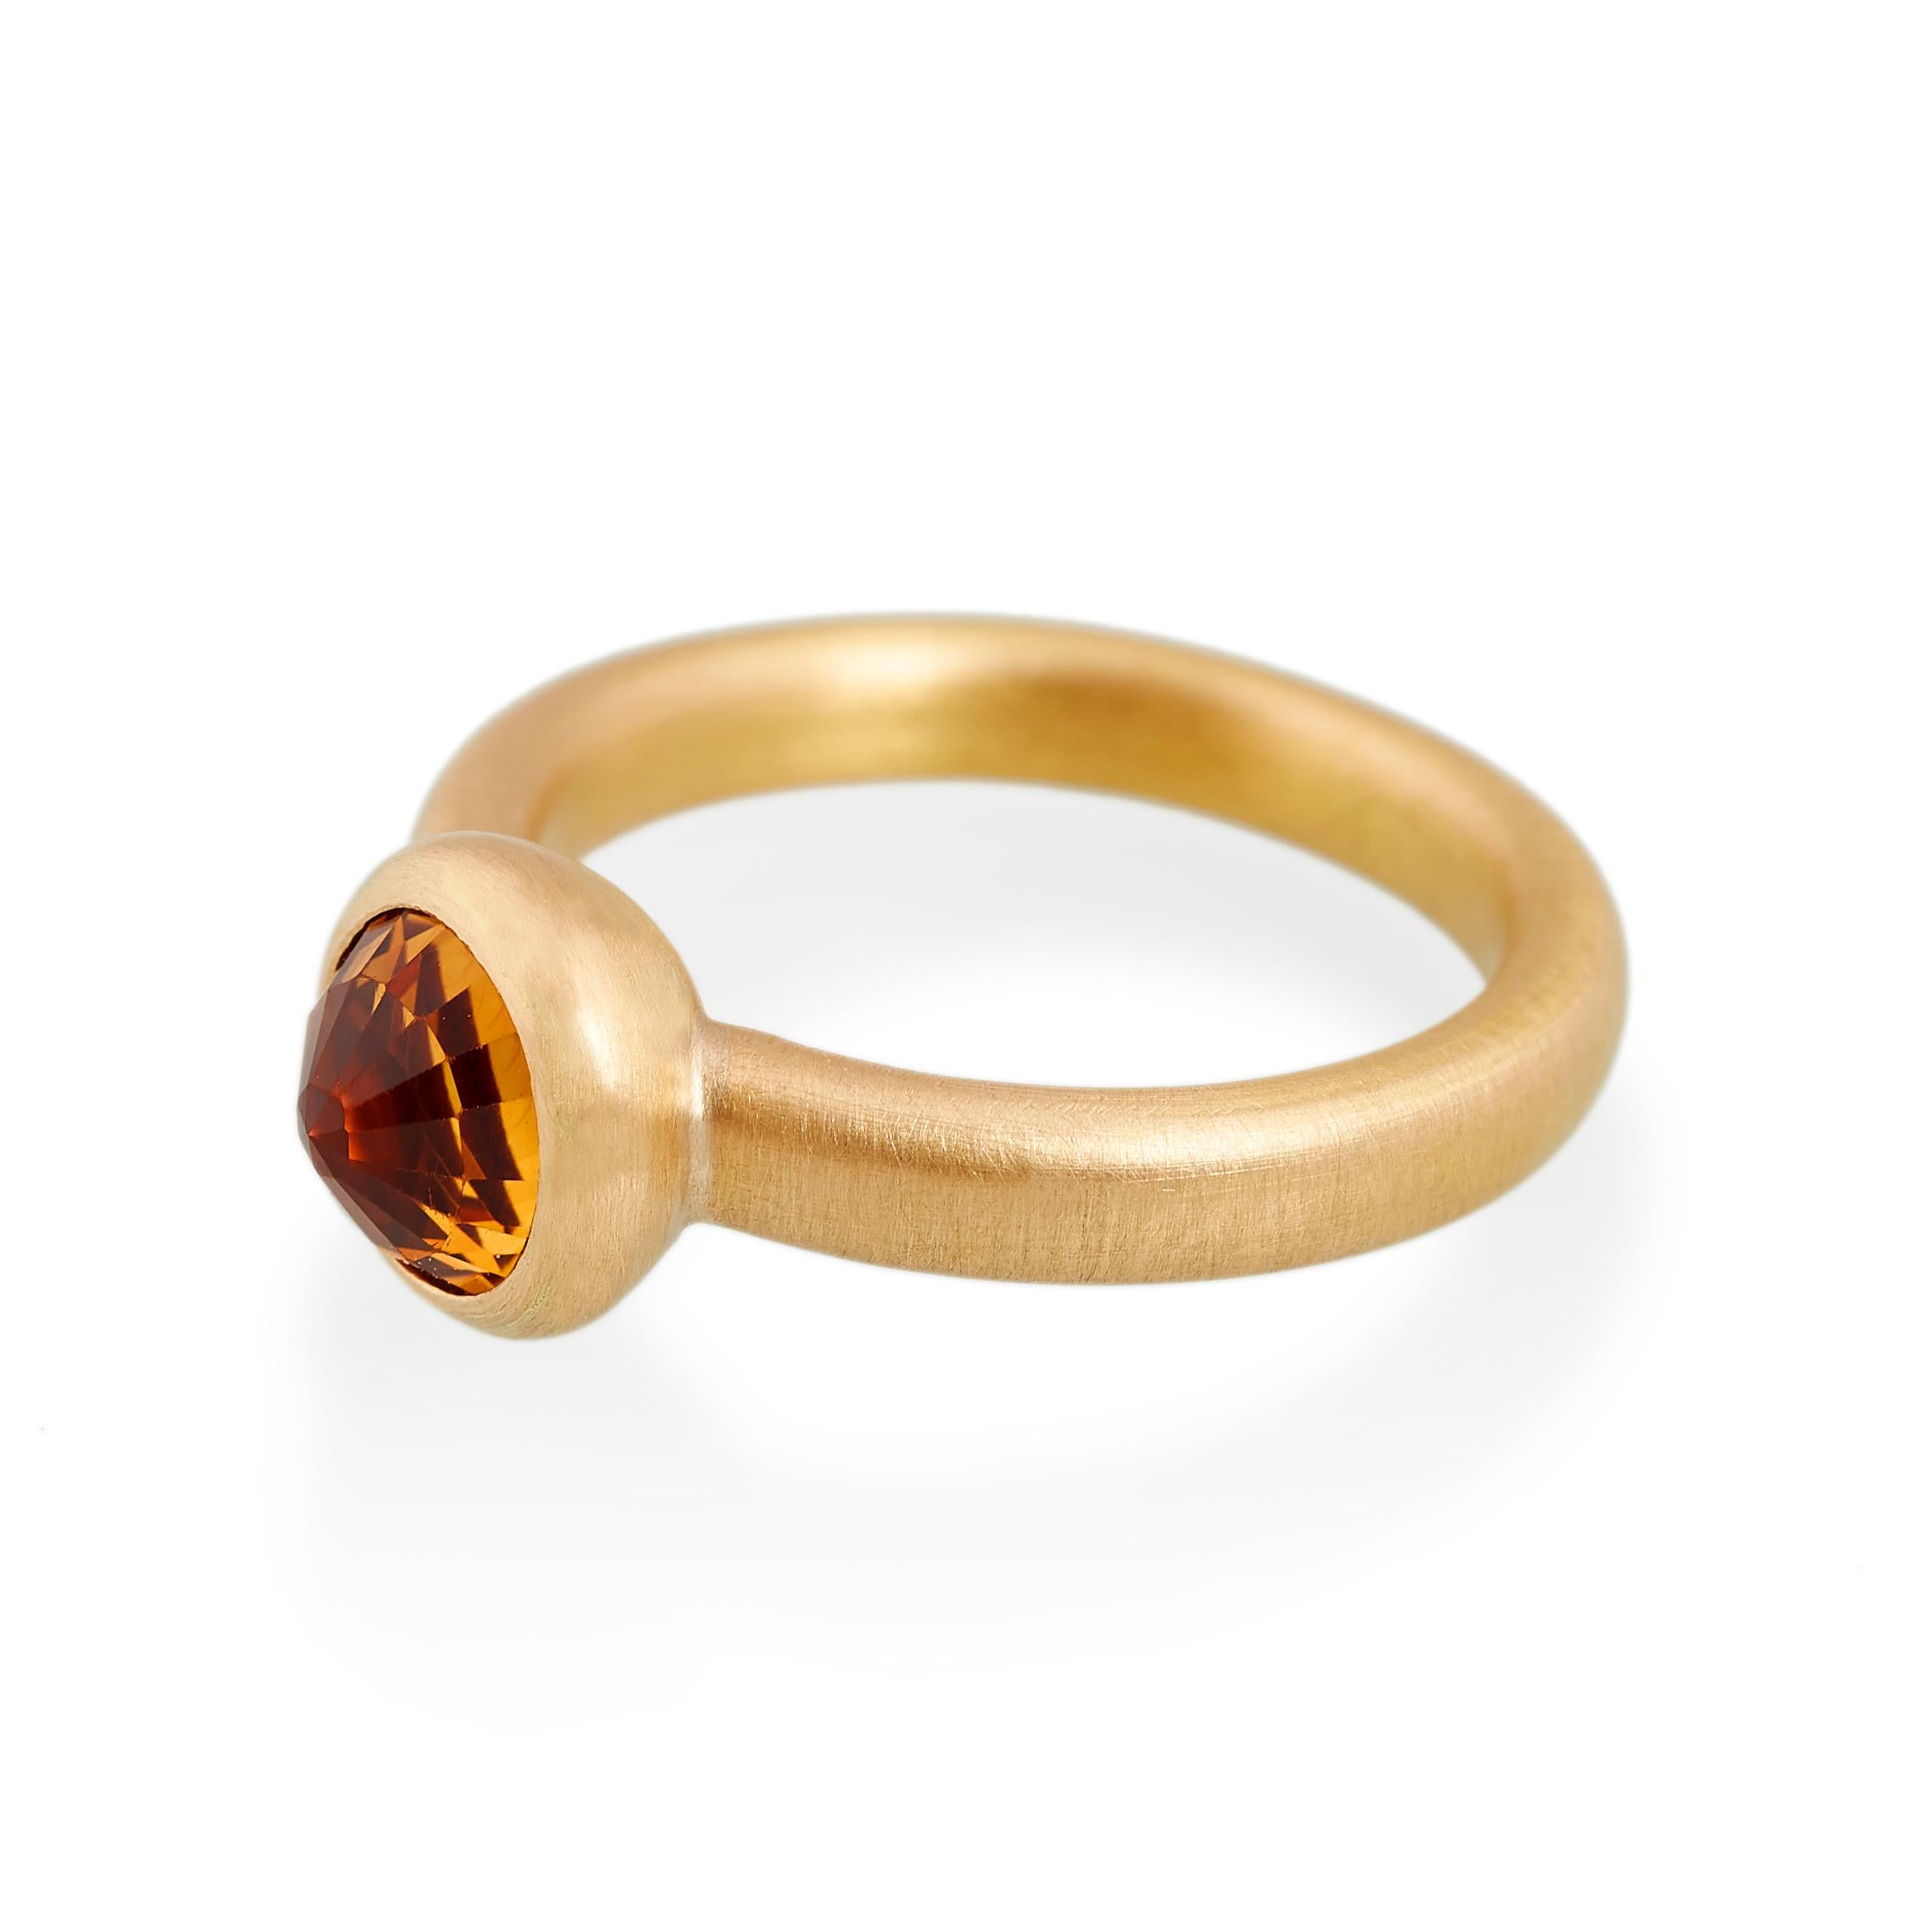 Faceted citrine ring.
Ref: G18001

8mm round citrine
22ct gold

Cadby & Co are a family business that specialise in reusing & up cycling old cut diamonds and fine gem stones. Deborah Cadby’s designs and skills in making are combined with Jeff